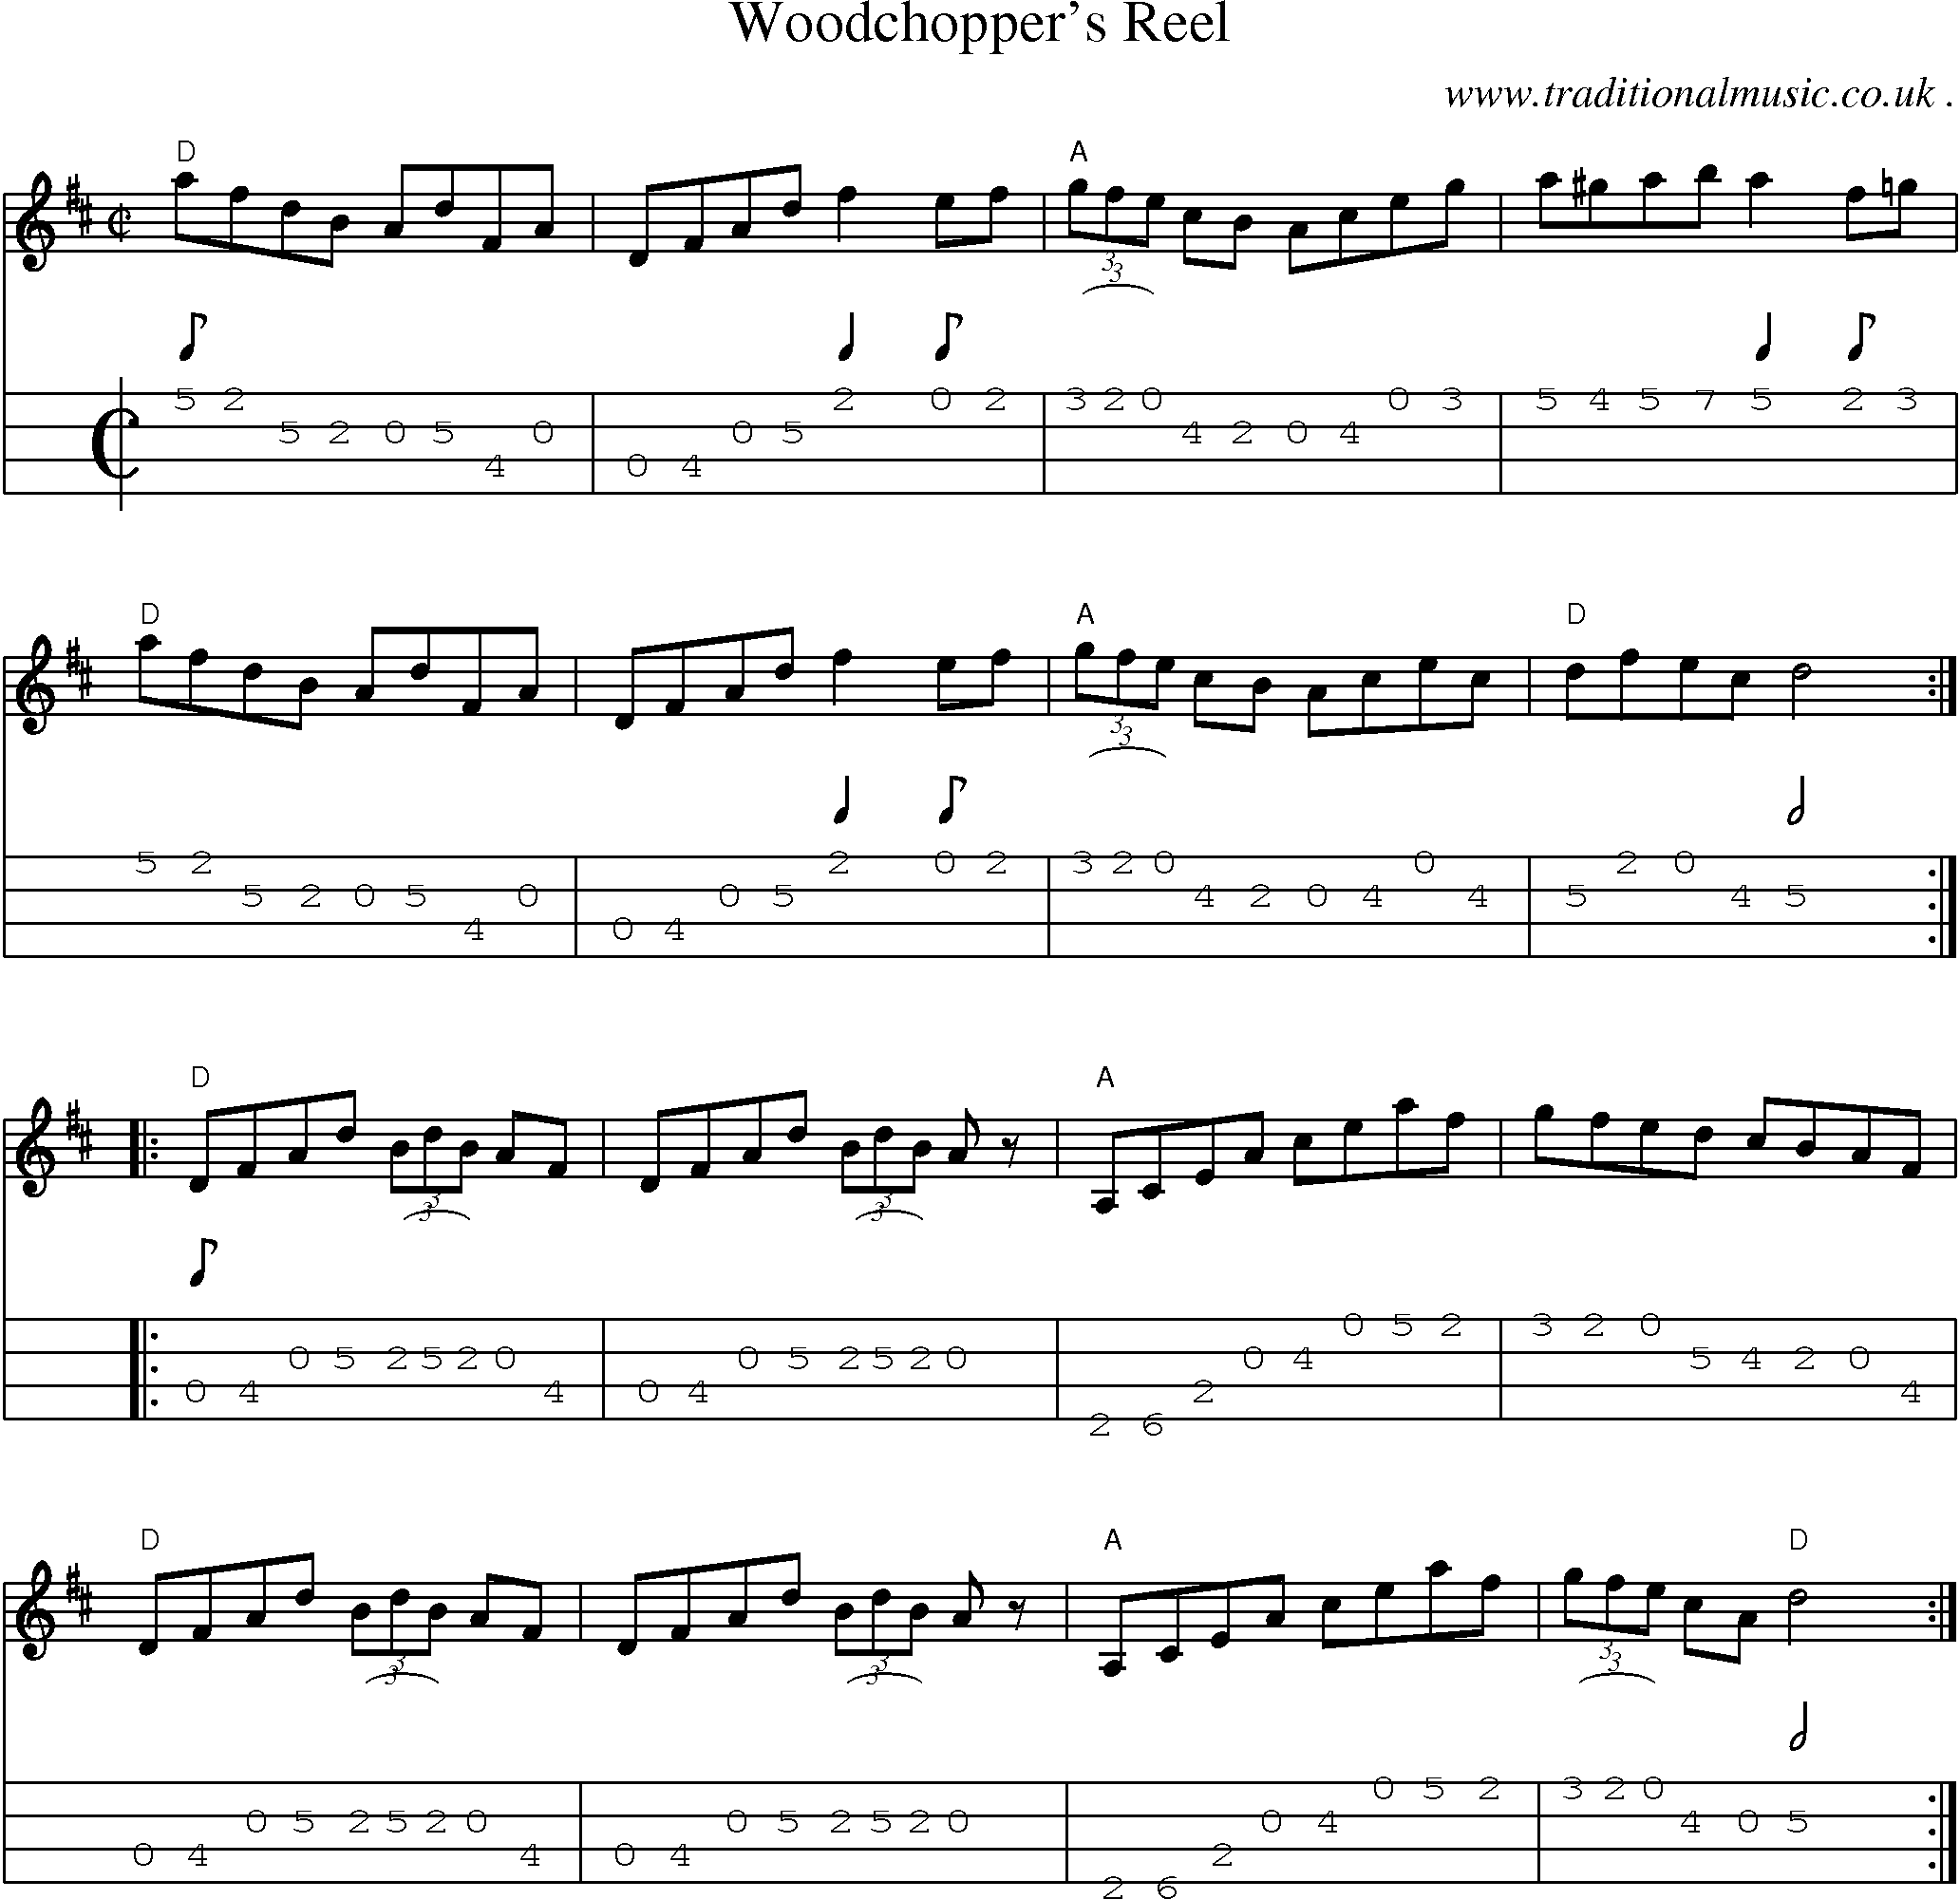 Music Score and Guitar Tabs for Woodchoppers Reel